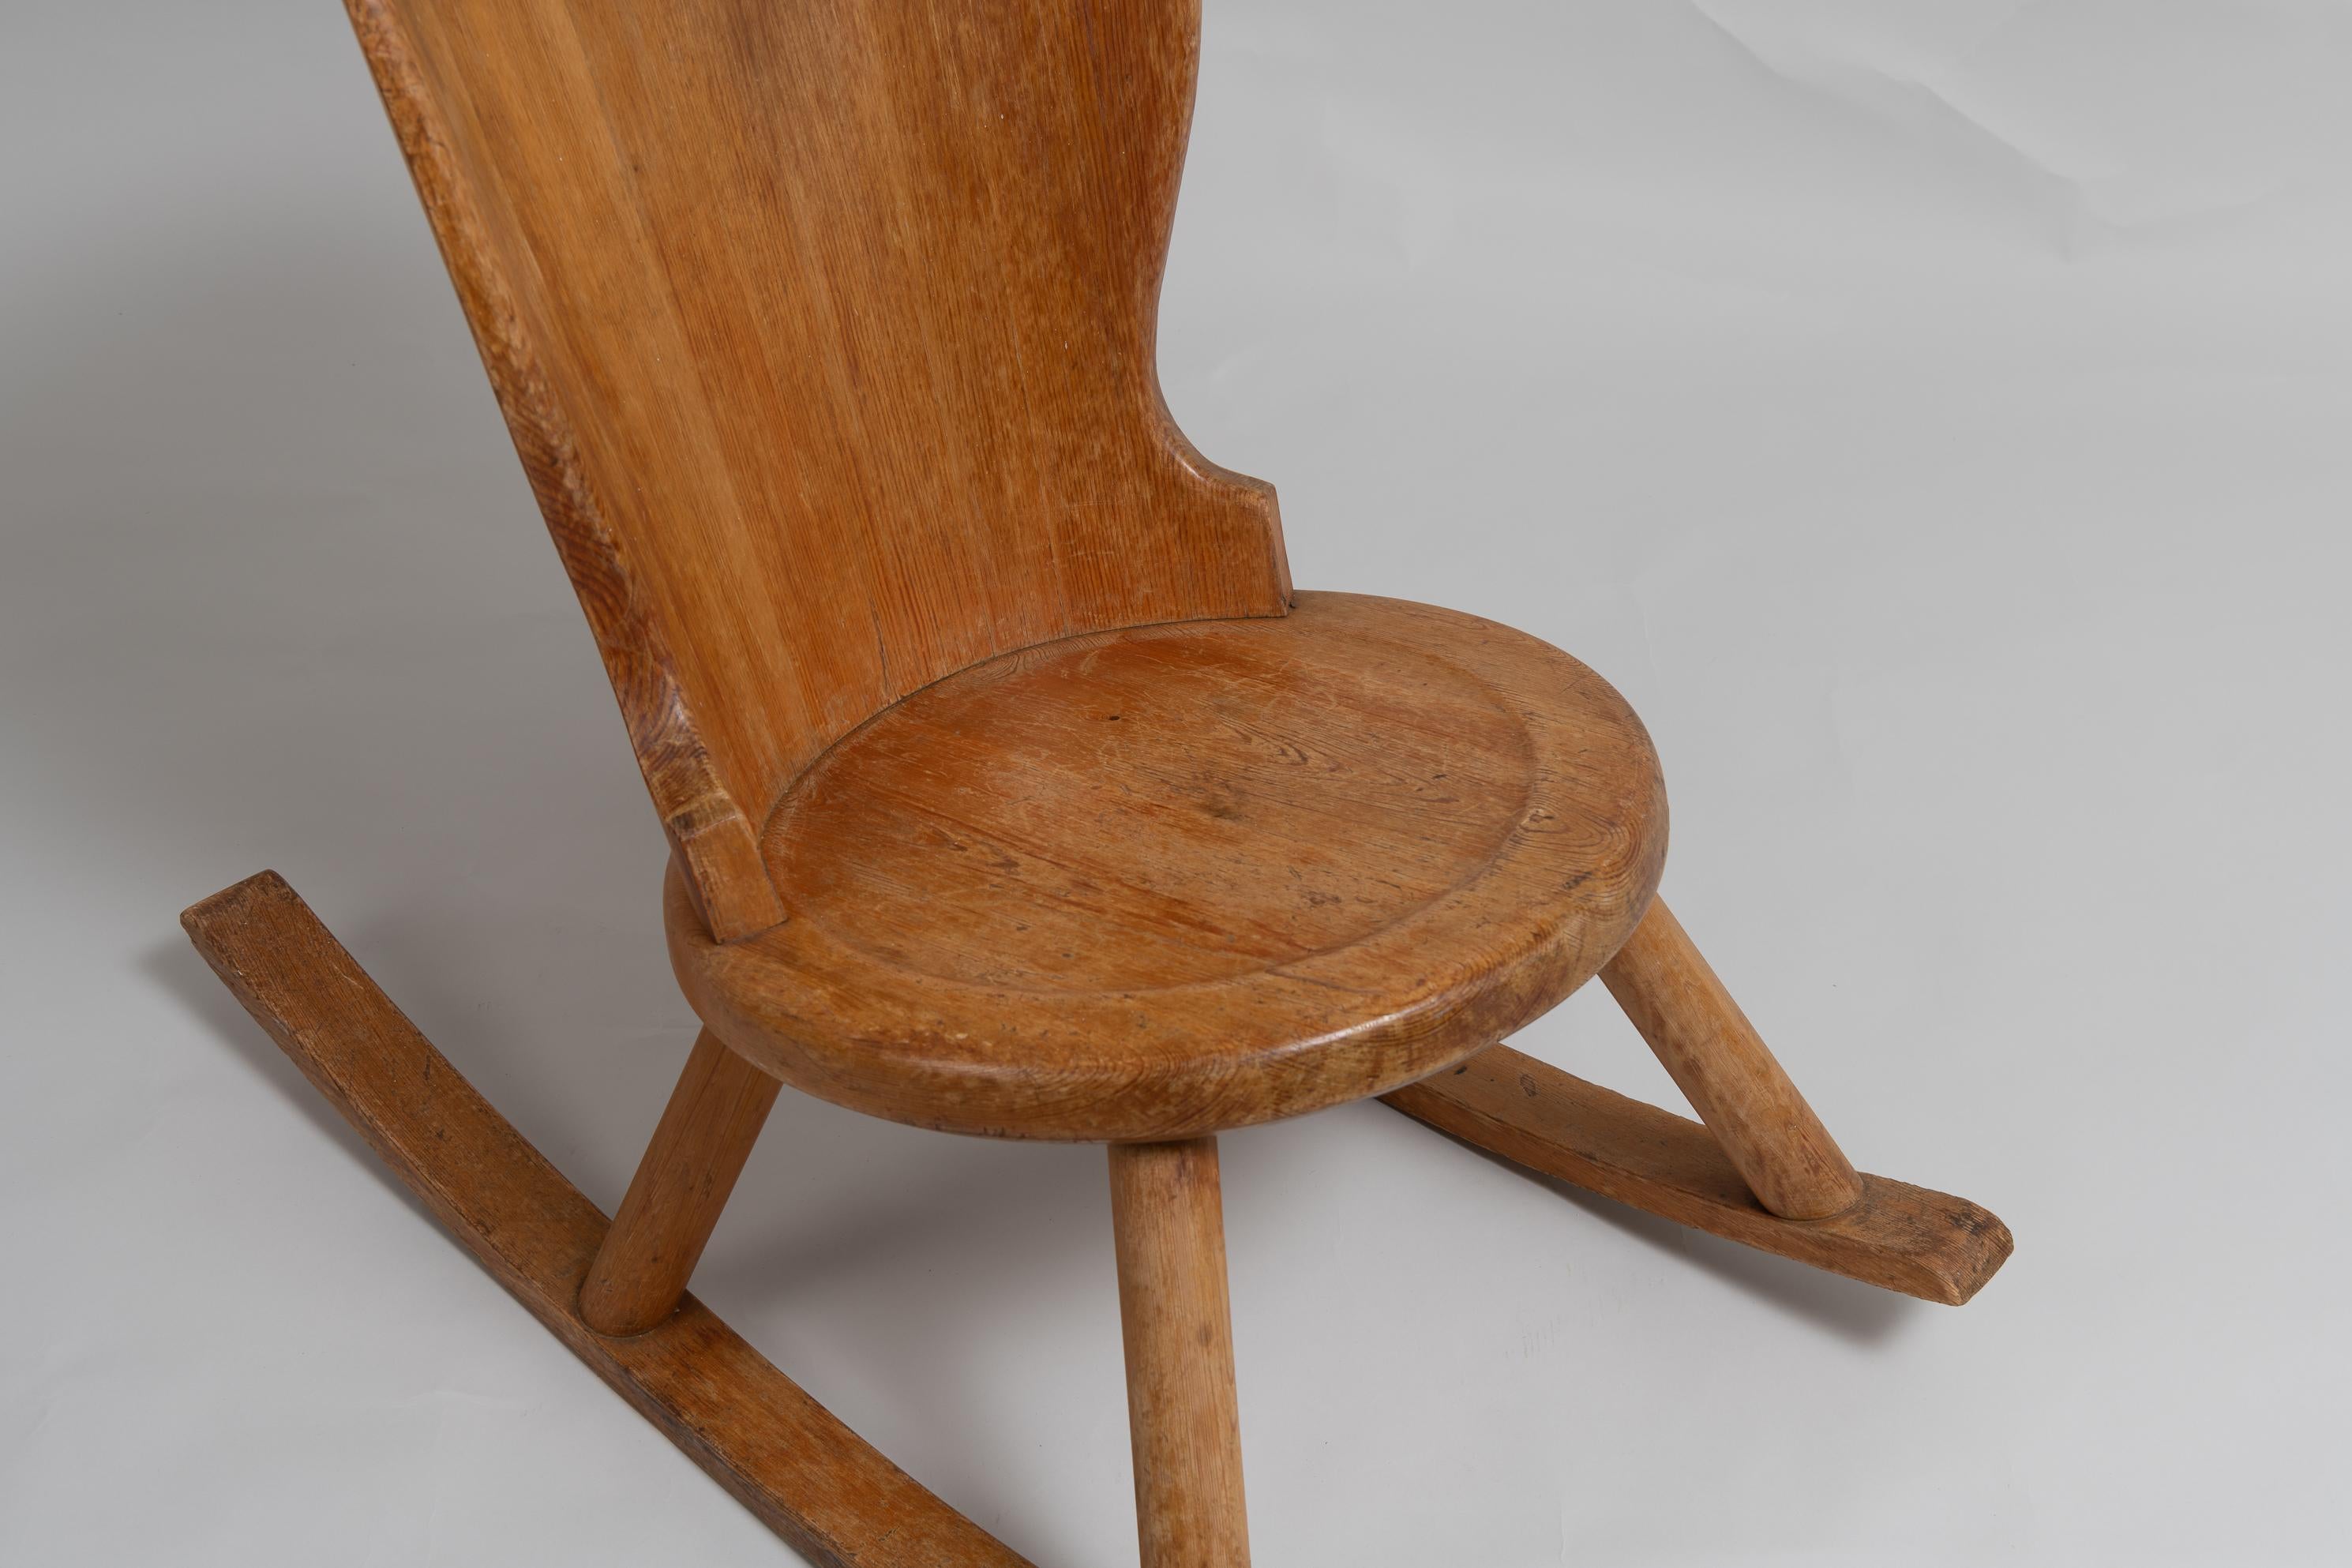 Hand-Crafted Axel Einar Hjort Style Swedish Hand-Made Pine Rocking Chair For Sale